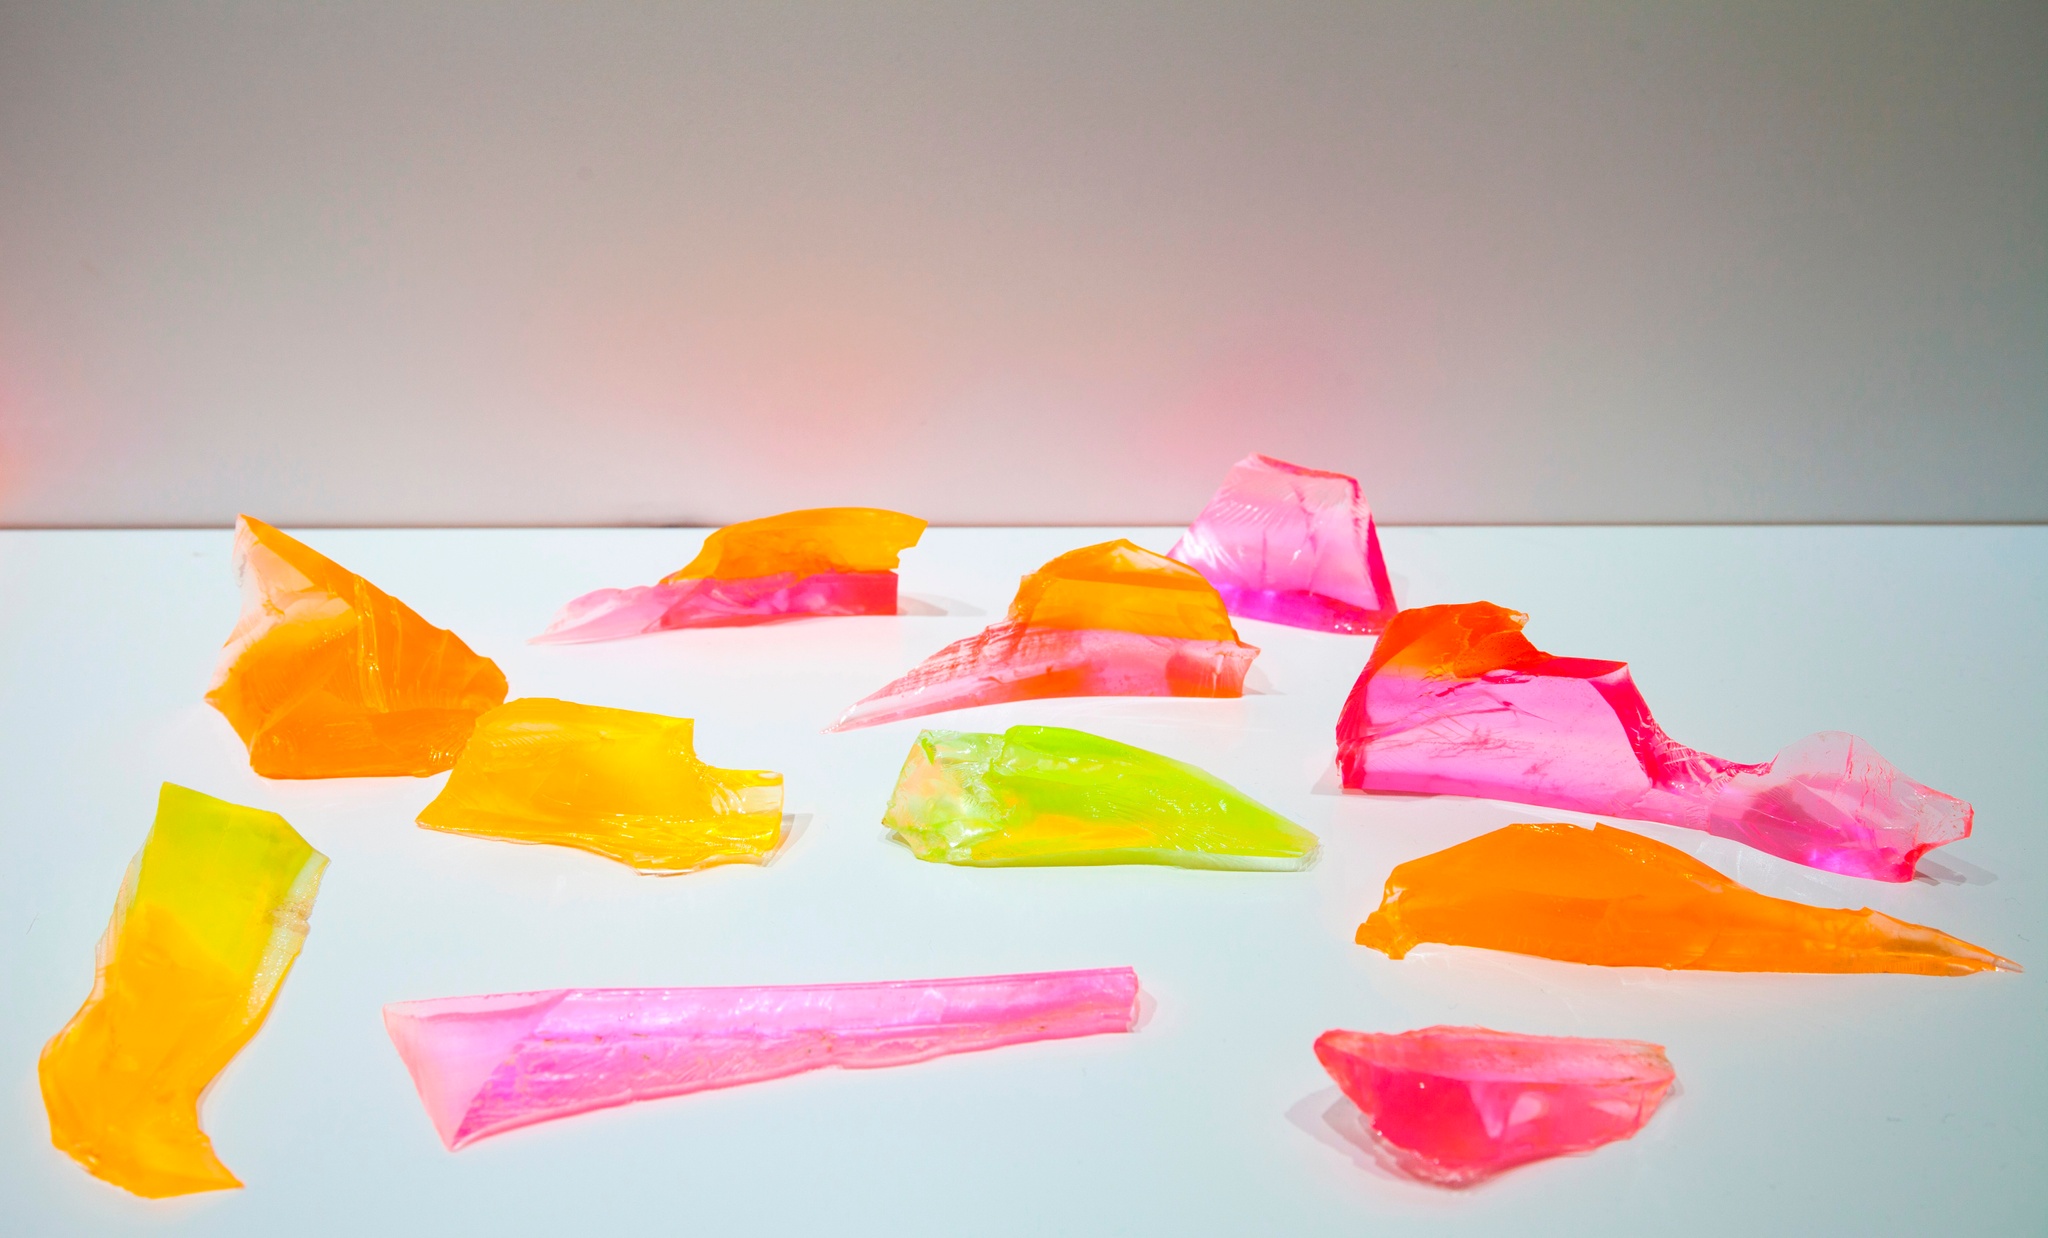 Transparent fragments, as if a glass has been shattered, are scattered on a white surface. The shard-like fragments are fluorescent pinks, oranges, greens, yellows, and purples.